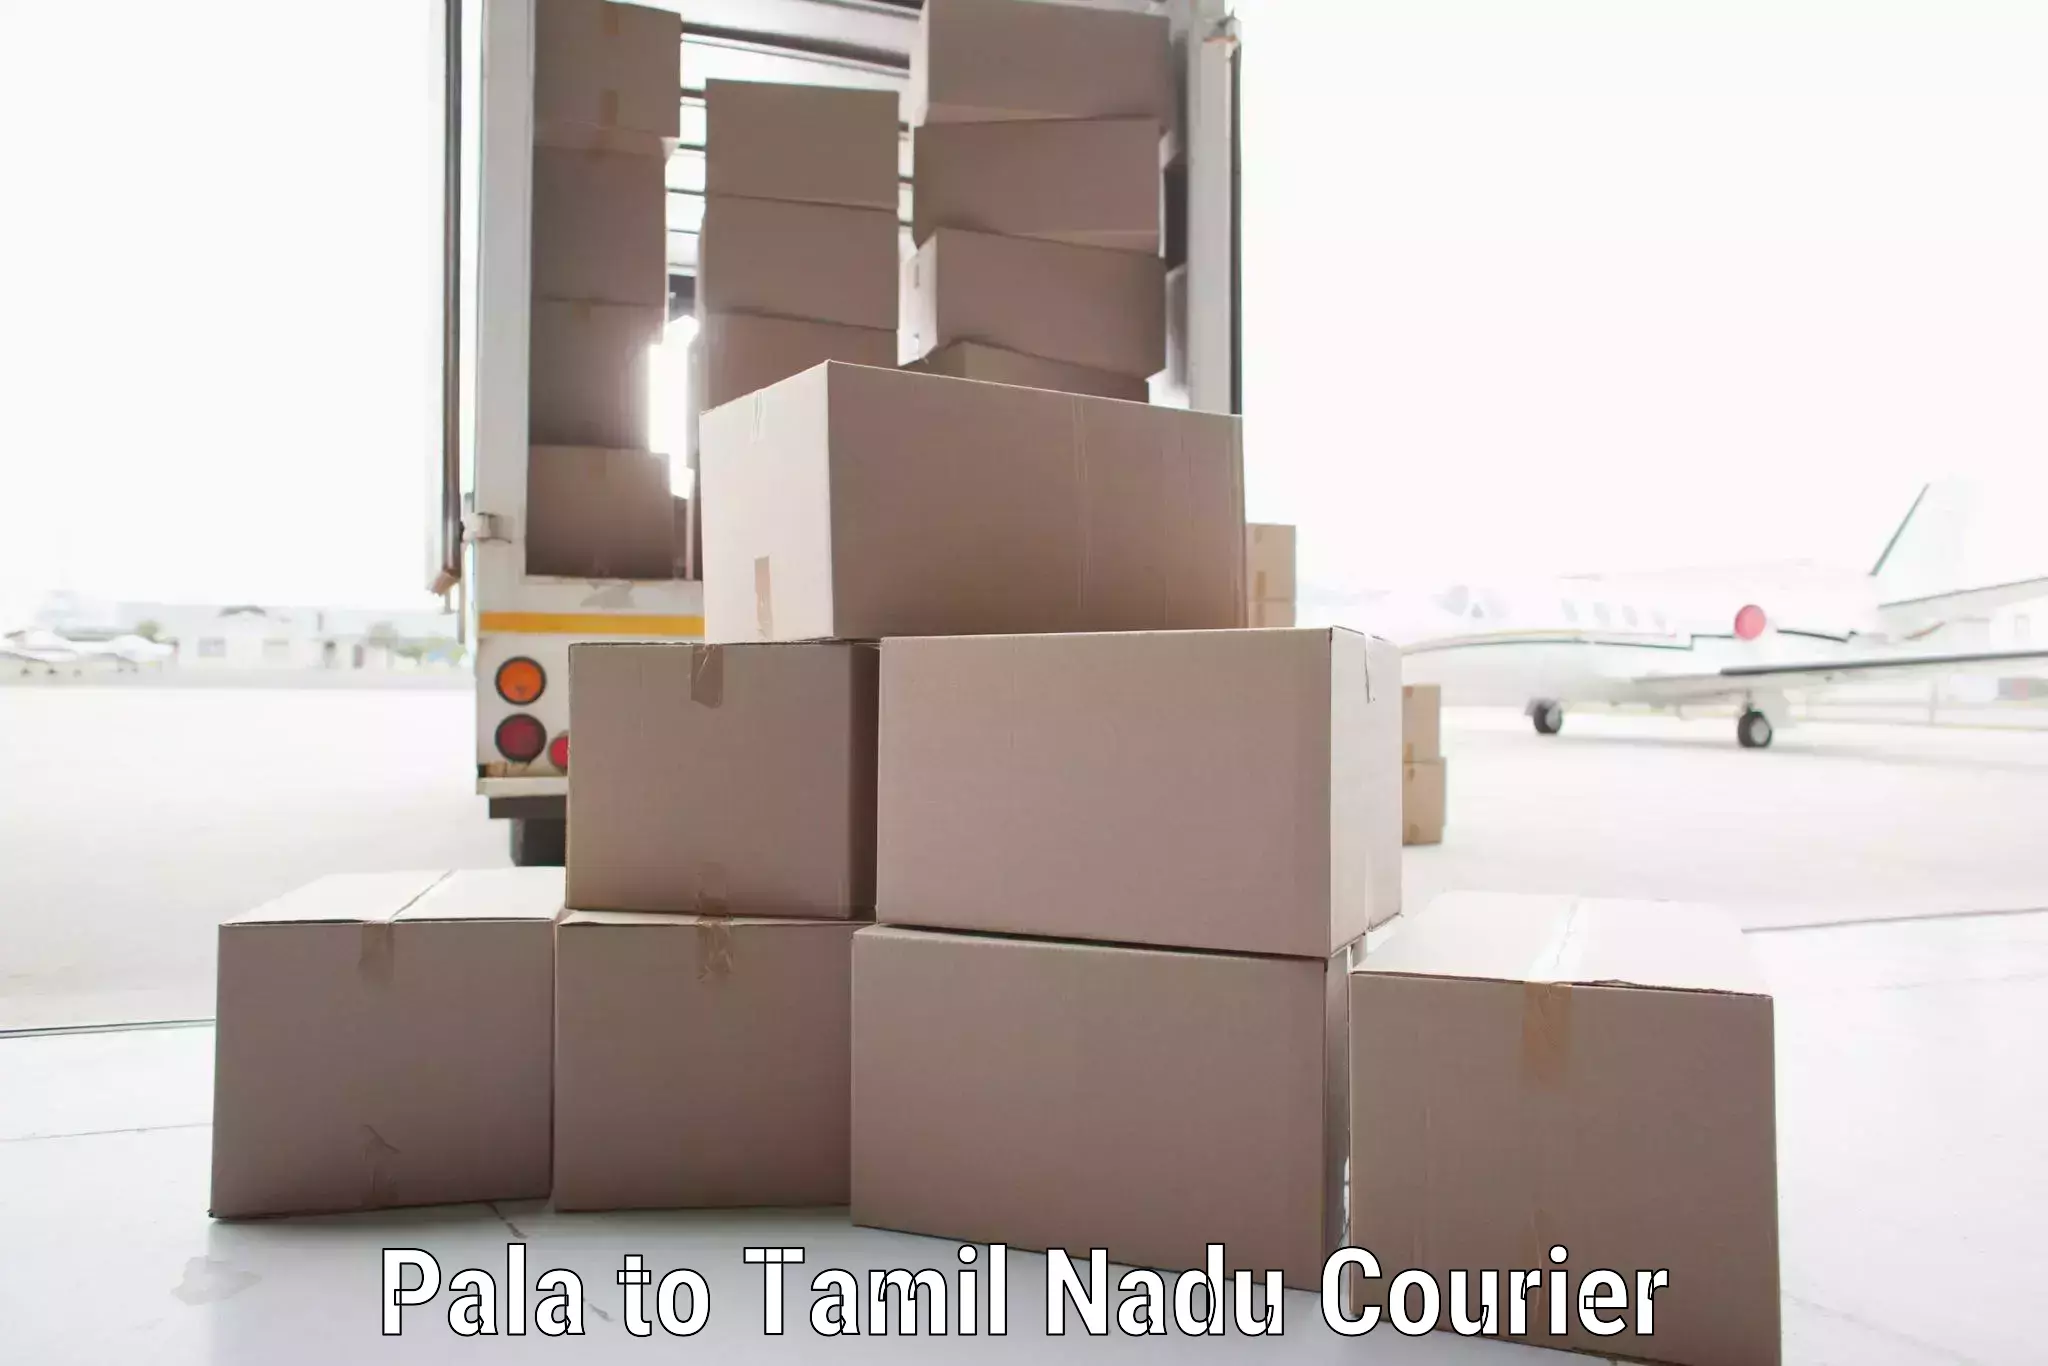 Nationwide courier service Pala to Perambalur